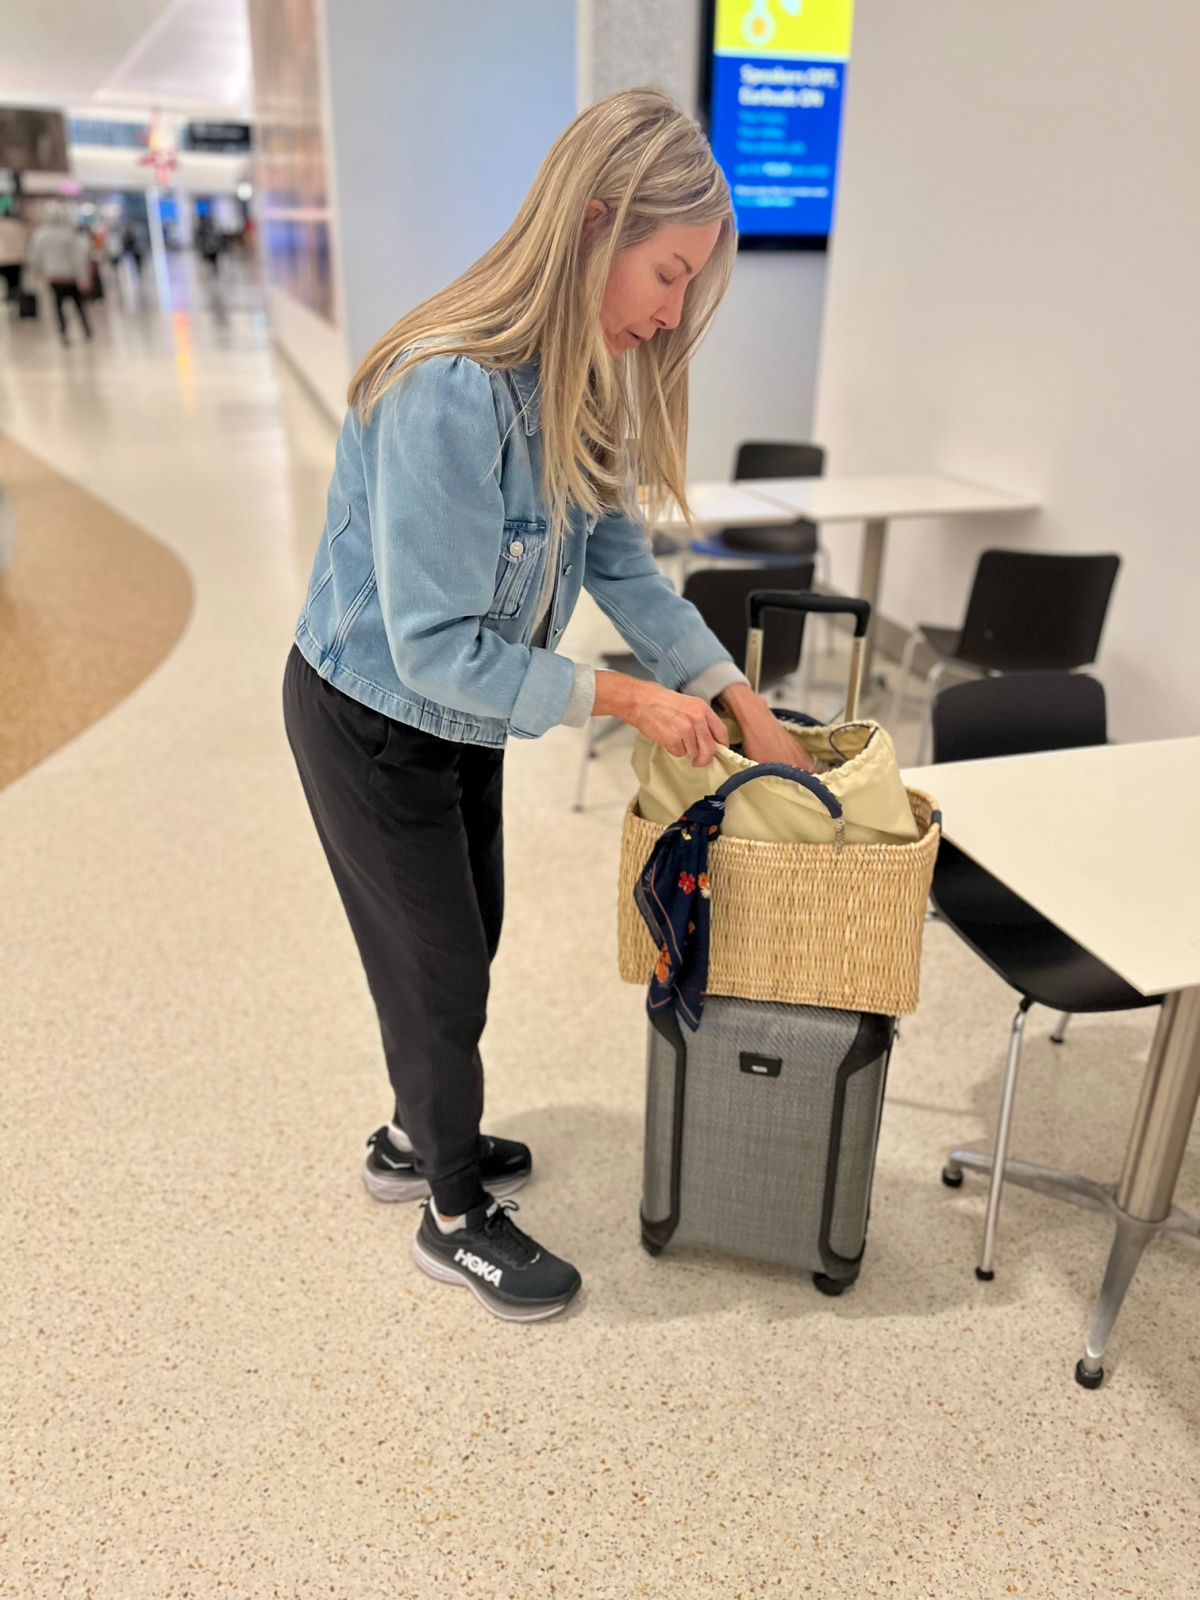 Woman leaning retrieving something from straw tote sitting on roller bag in airport.